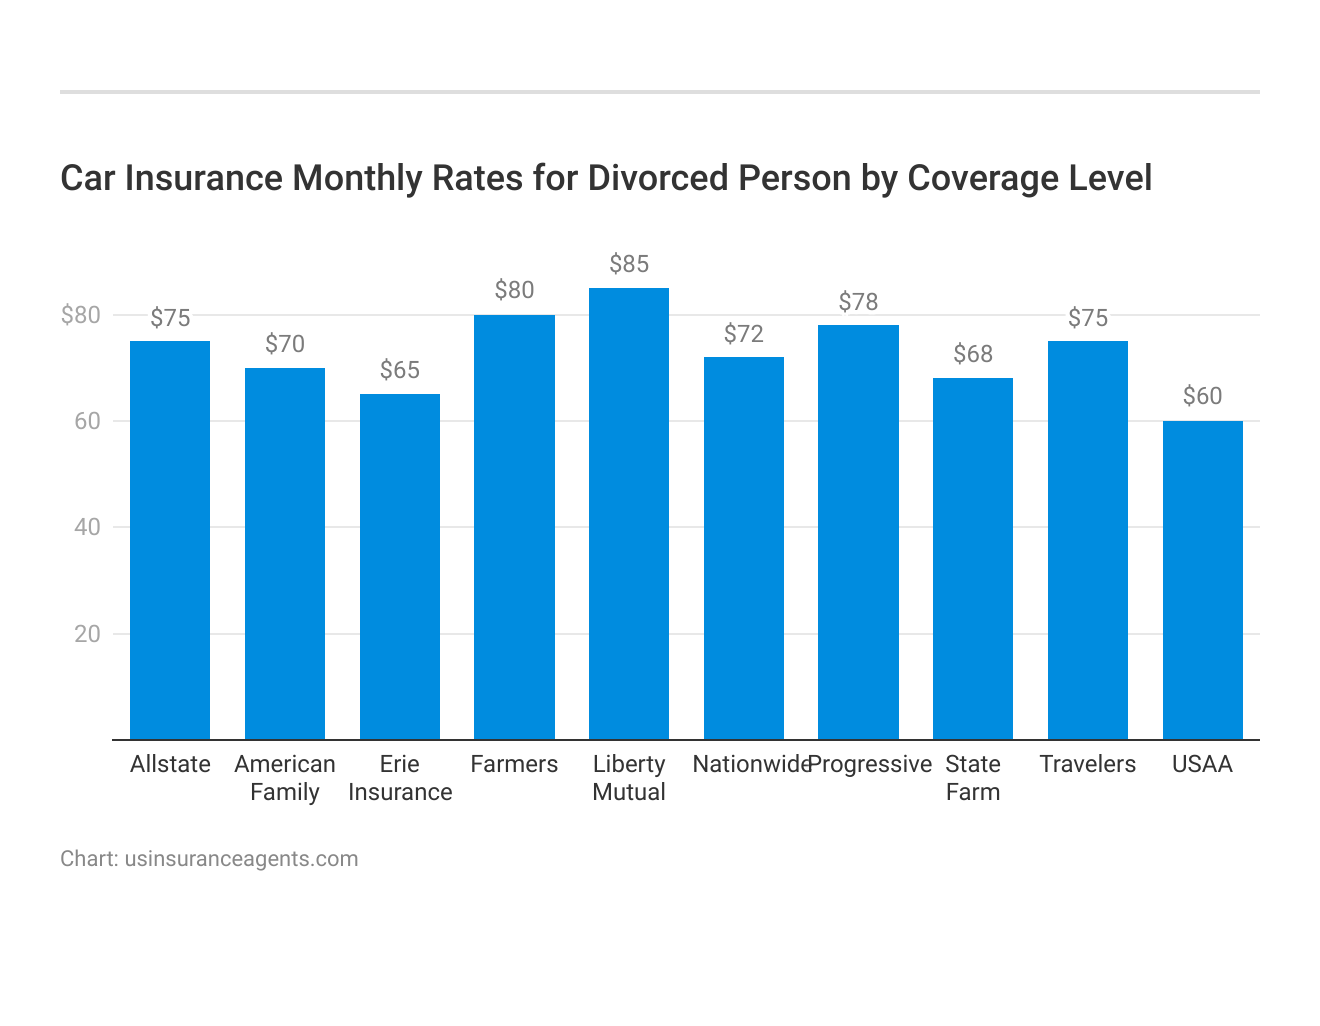 <h3>Car Insurance Monthly Rates for Divorced Person by Coverage Level</h3>